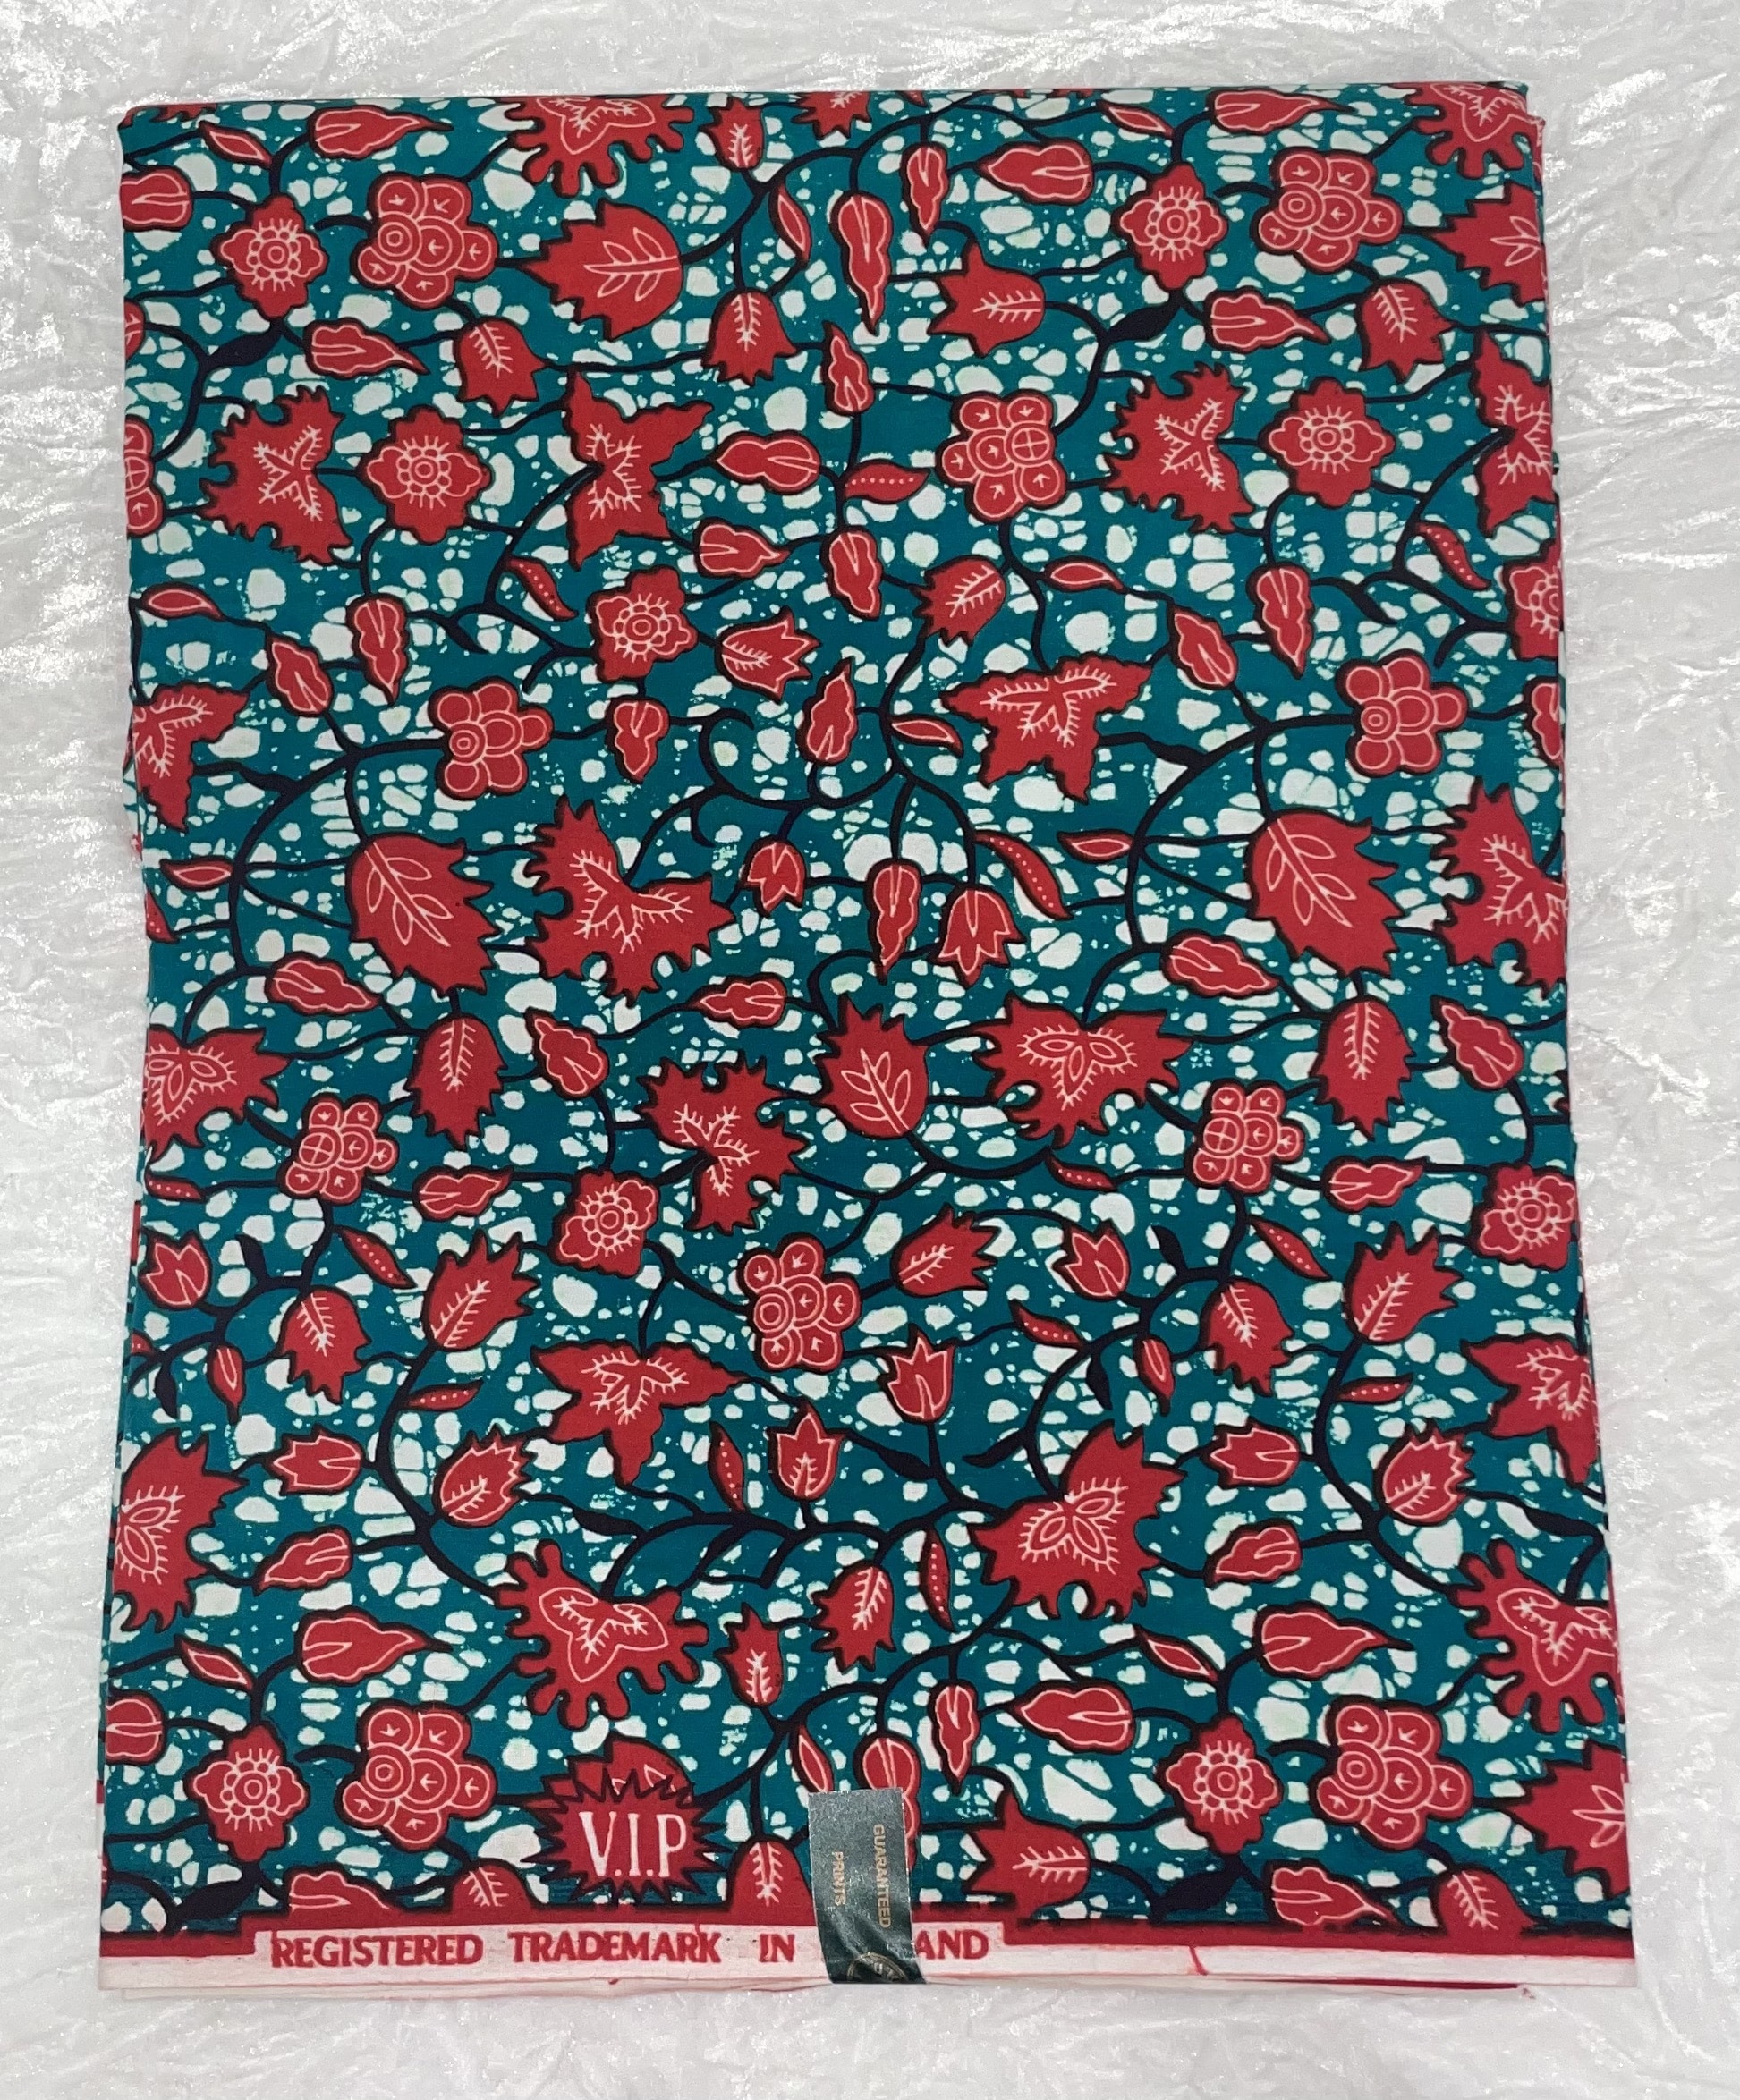 African Ankara Turquoise & Red Multi Floral Style 6 Yards VIP Fabric